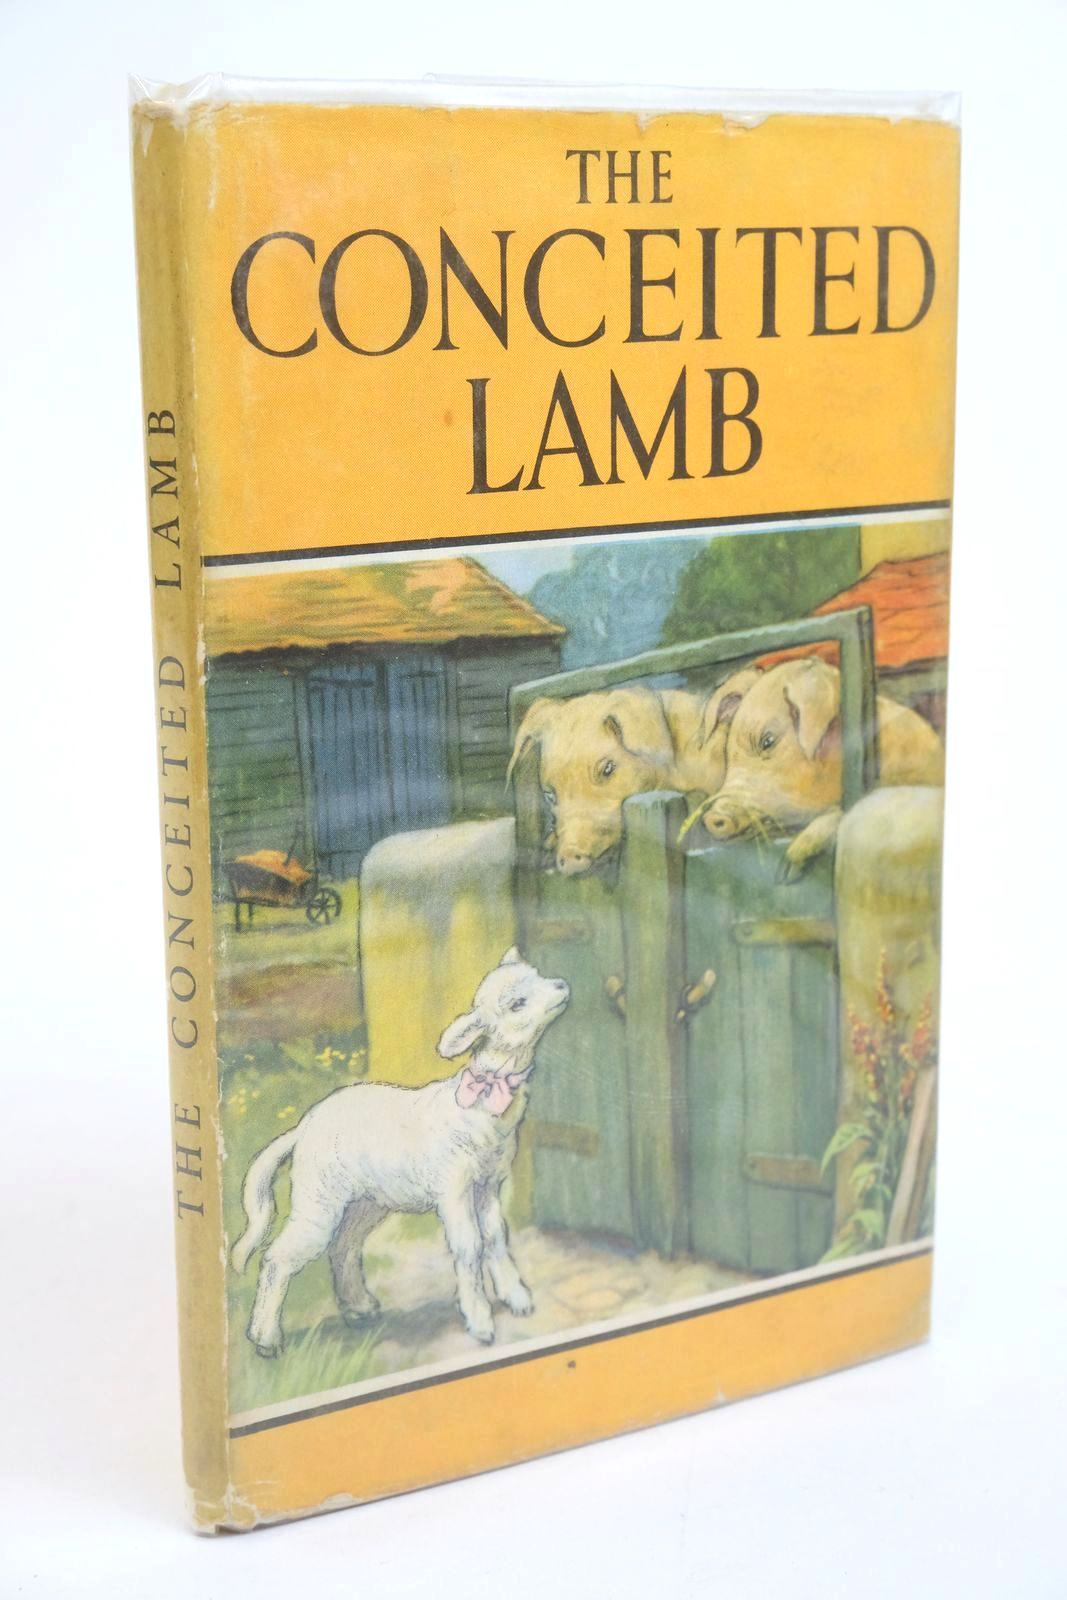 Photo of THE CONCEITED LAMB written by Barr, Noel illustrated by Hickling, P.B. published by Wills &amp; Hepworth Ltd. (STOCK CODE: 1322392)  for sale by Stella & Rose's Books